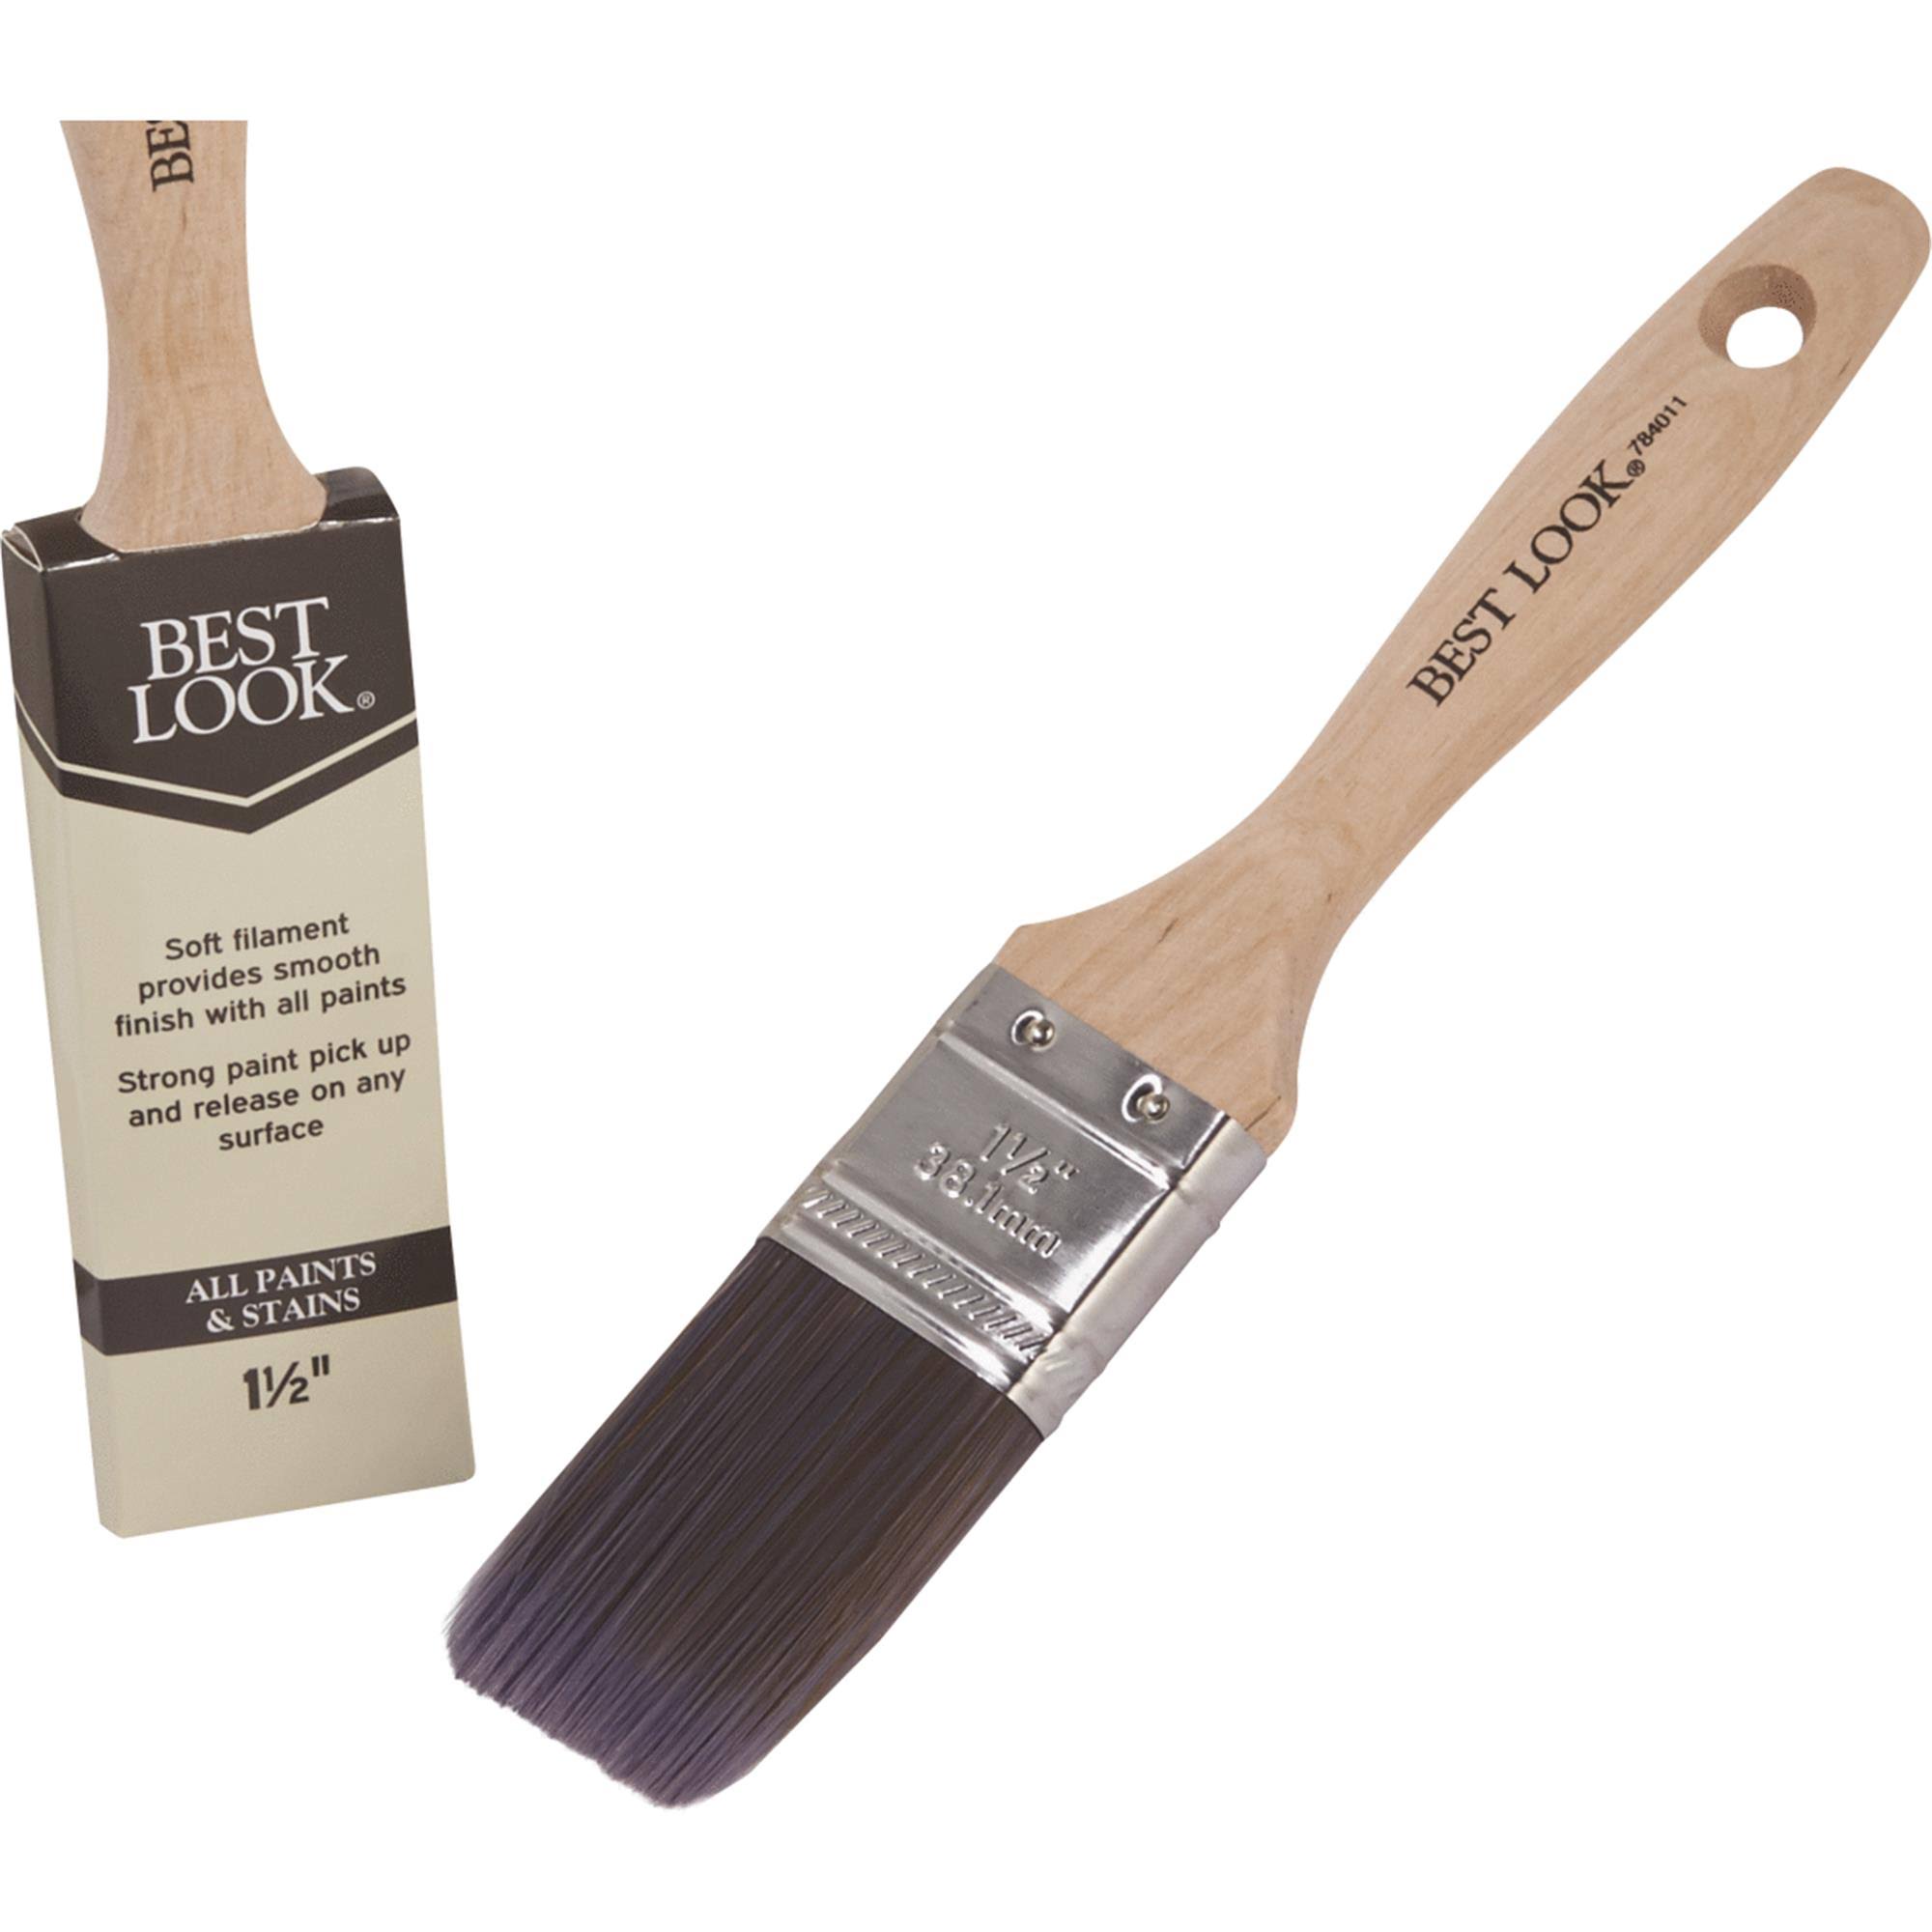 Best Look 1.5 in. Flat Polyester Paint Brush 784011